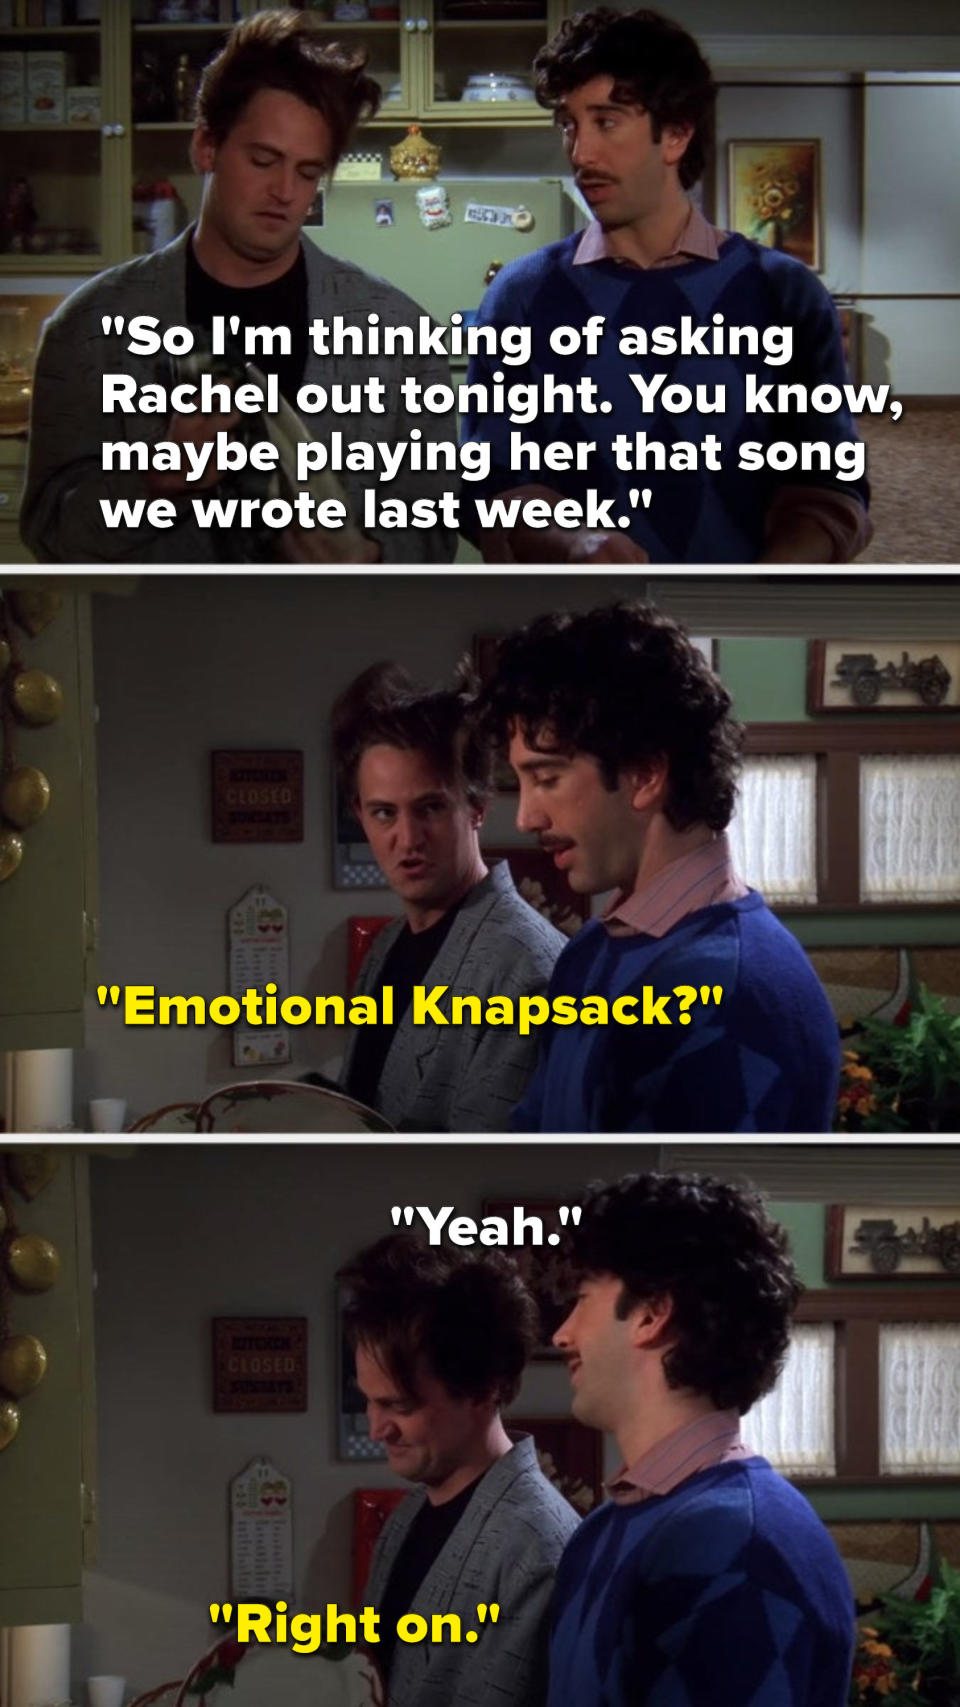 On Friends, in an 80s flashback, Ross says, So Im thinking of asking Rachel out tonight, you know, maybe playing her that song we wrote last week, Chandler asks, Emotional Knapsack, Ross says, Yeah, and Chandler says, Right on